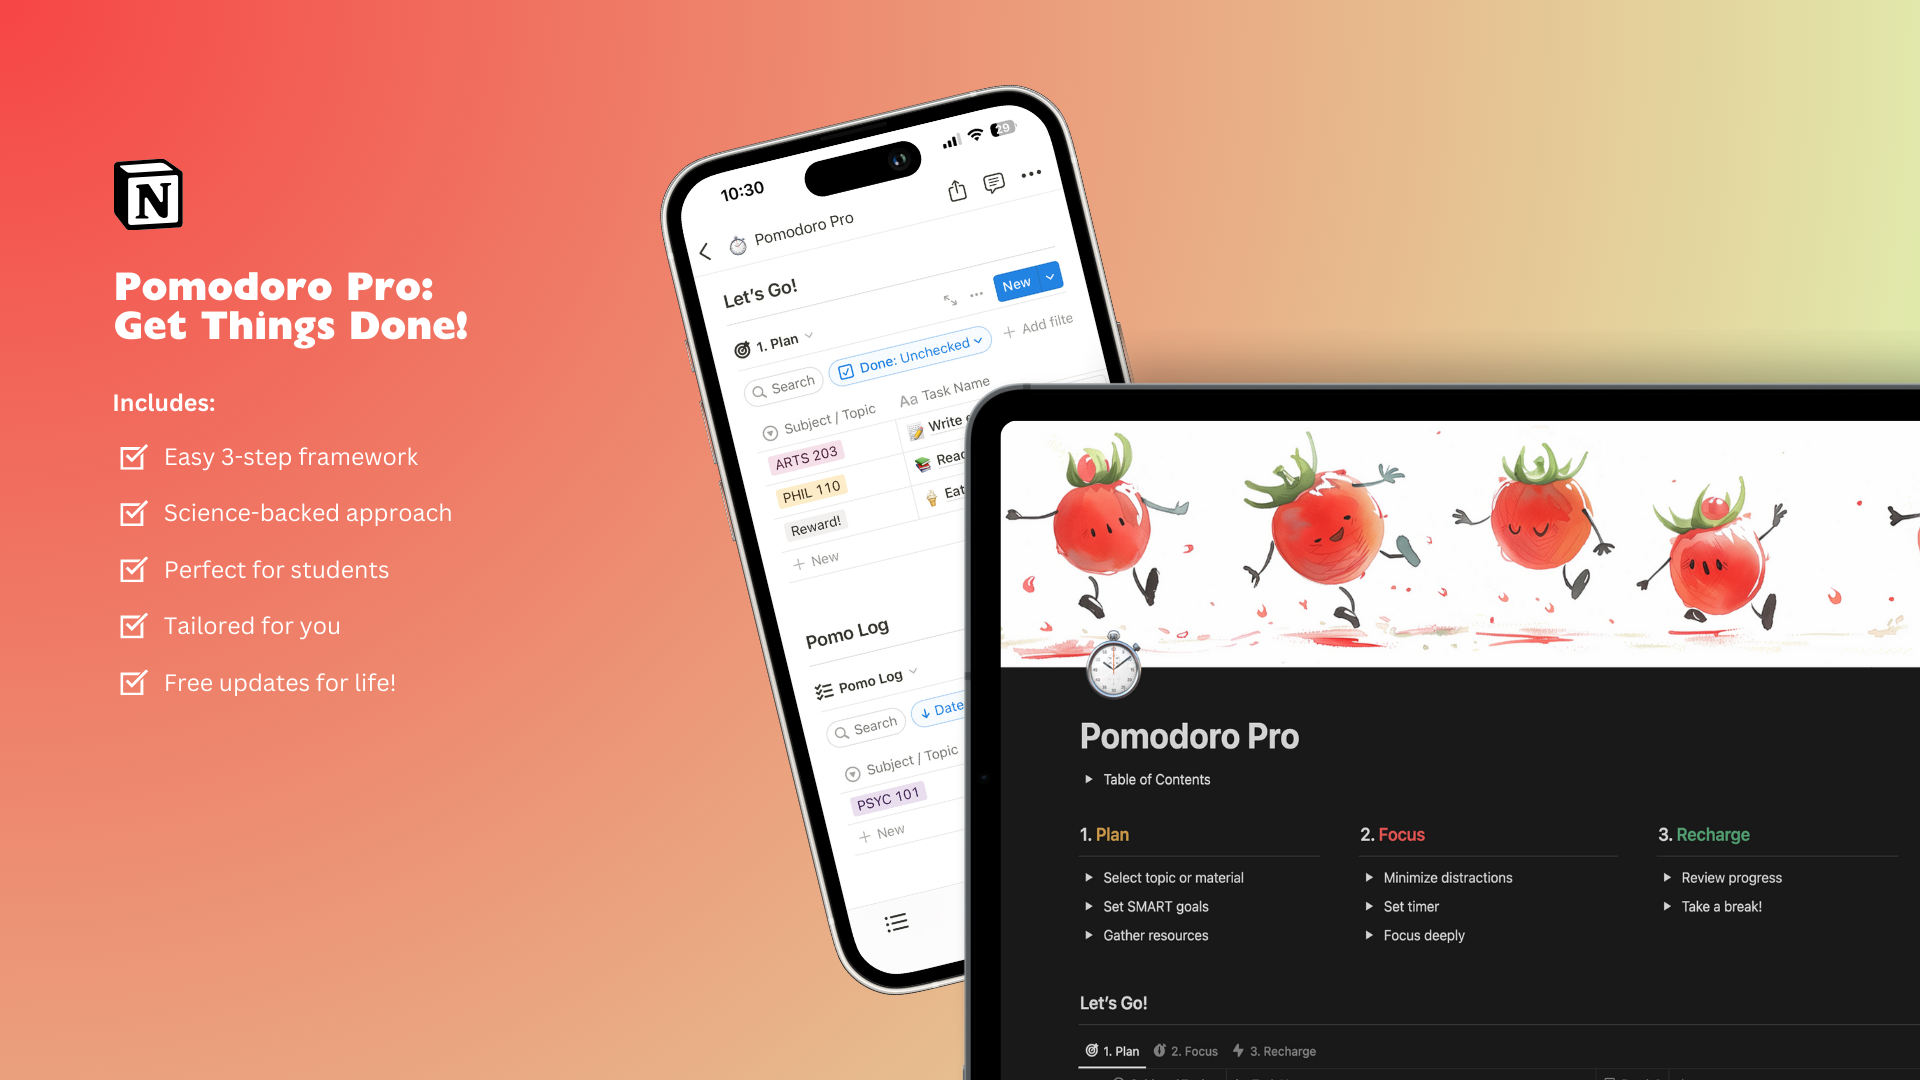 Feeling overwhelmed by exam prep? Struggling to stay focused and remember information?

Introducing Pomodoro Pro – your ultimate Notion template built around the powerful 3-step Plan, Focus, Recharge framework for mastering the Pomodoro Technique and acing your exams!